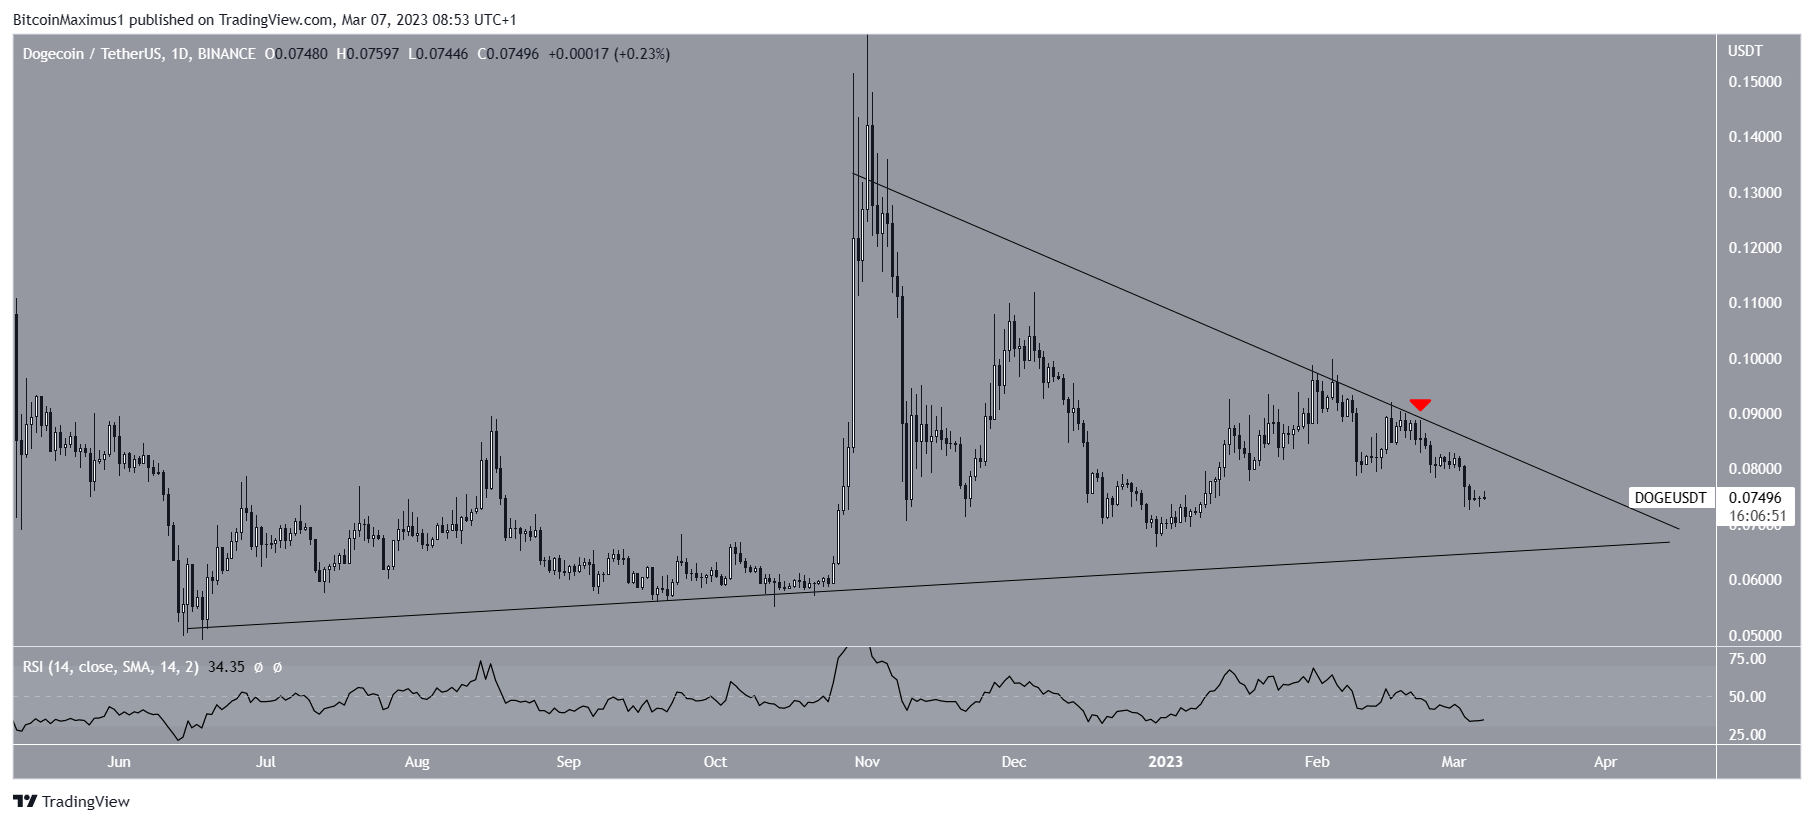 Dogecoin (DOGE) pris Triangle Movement